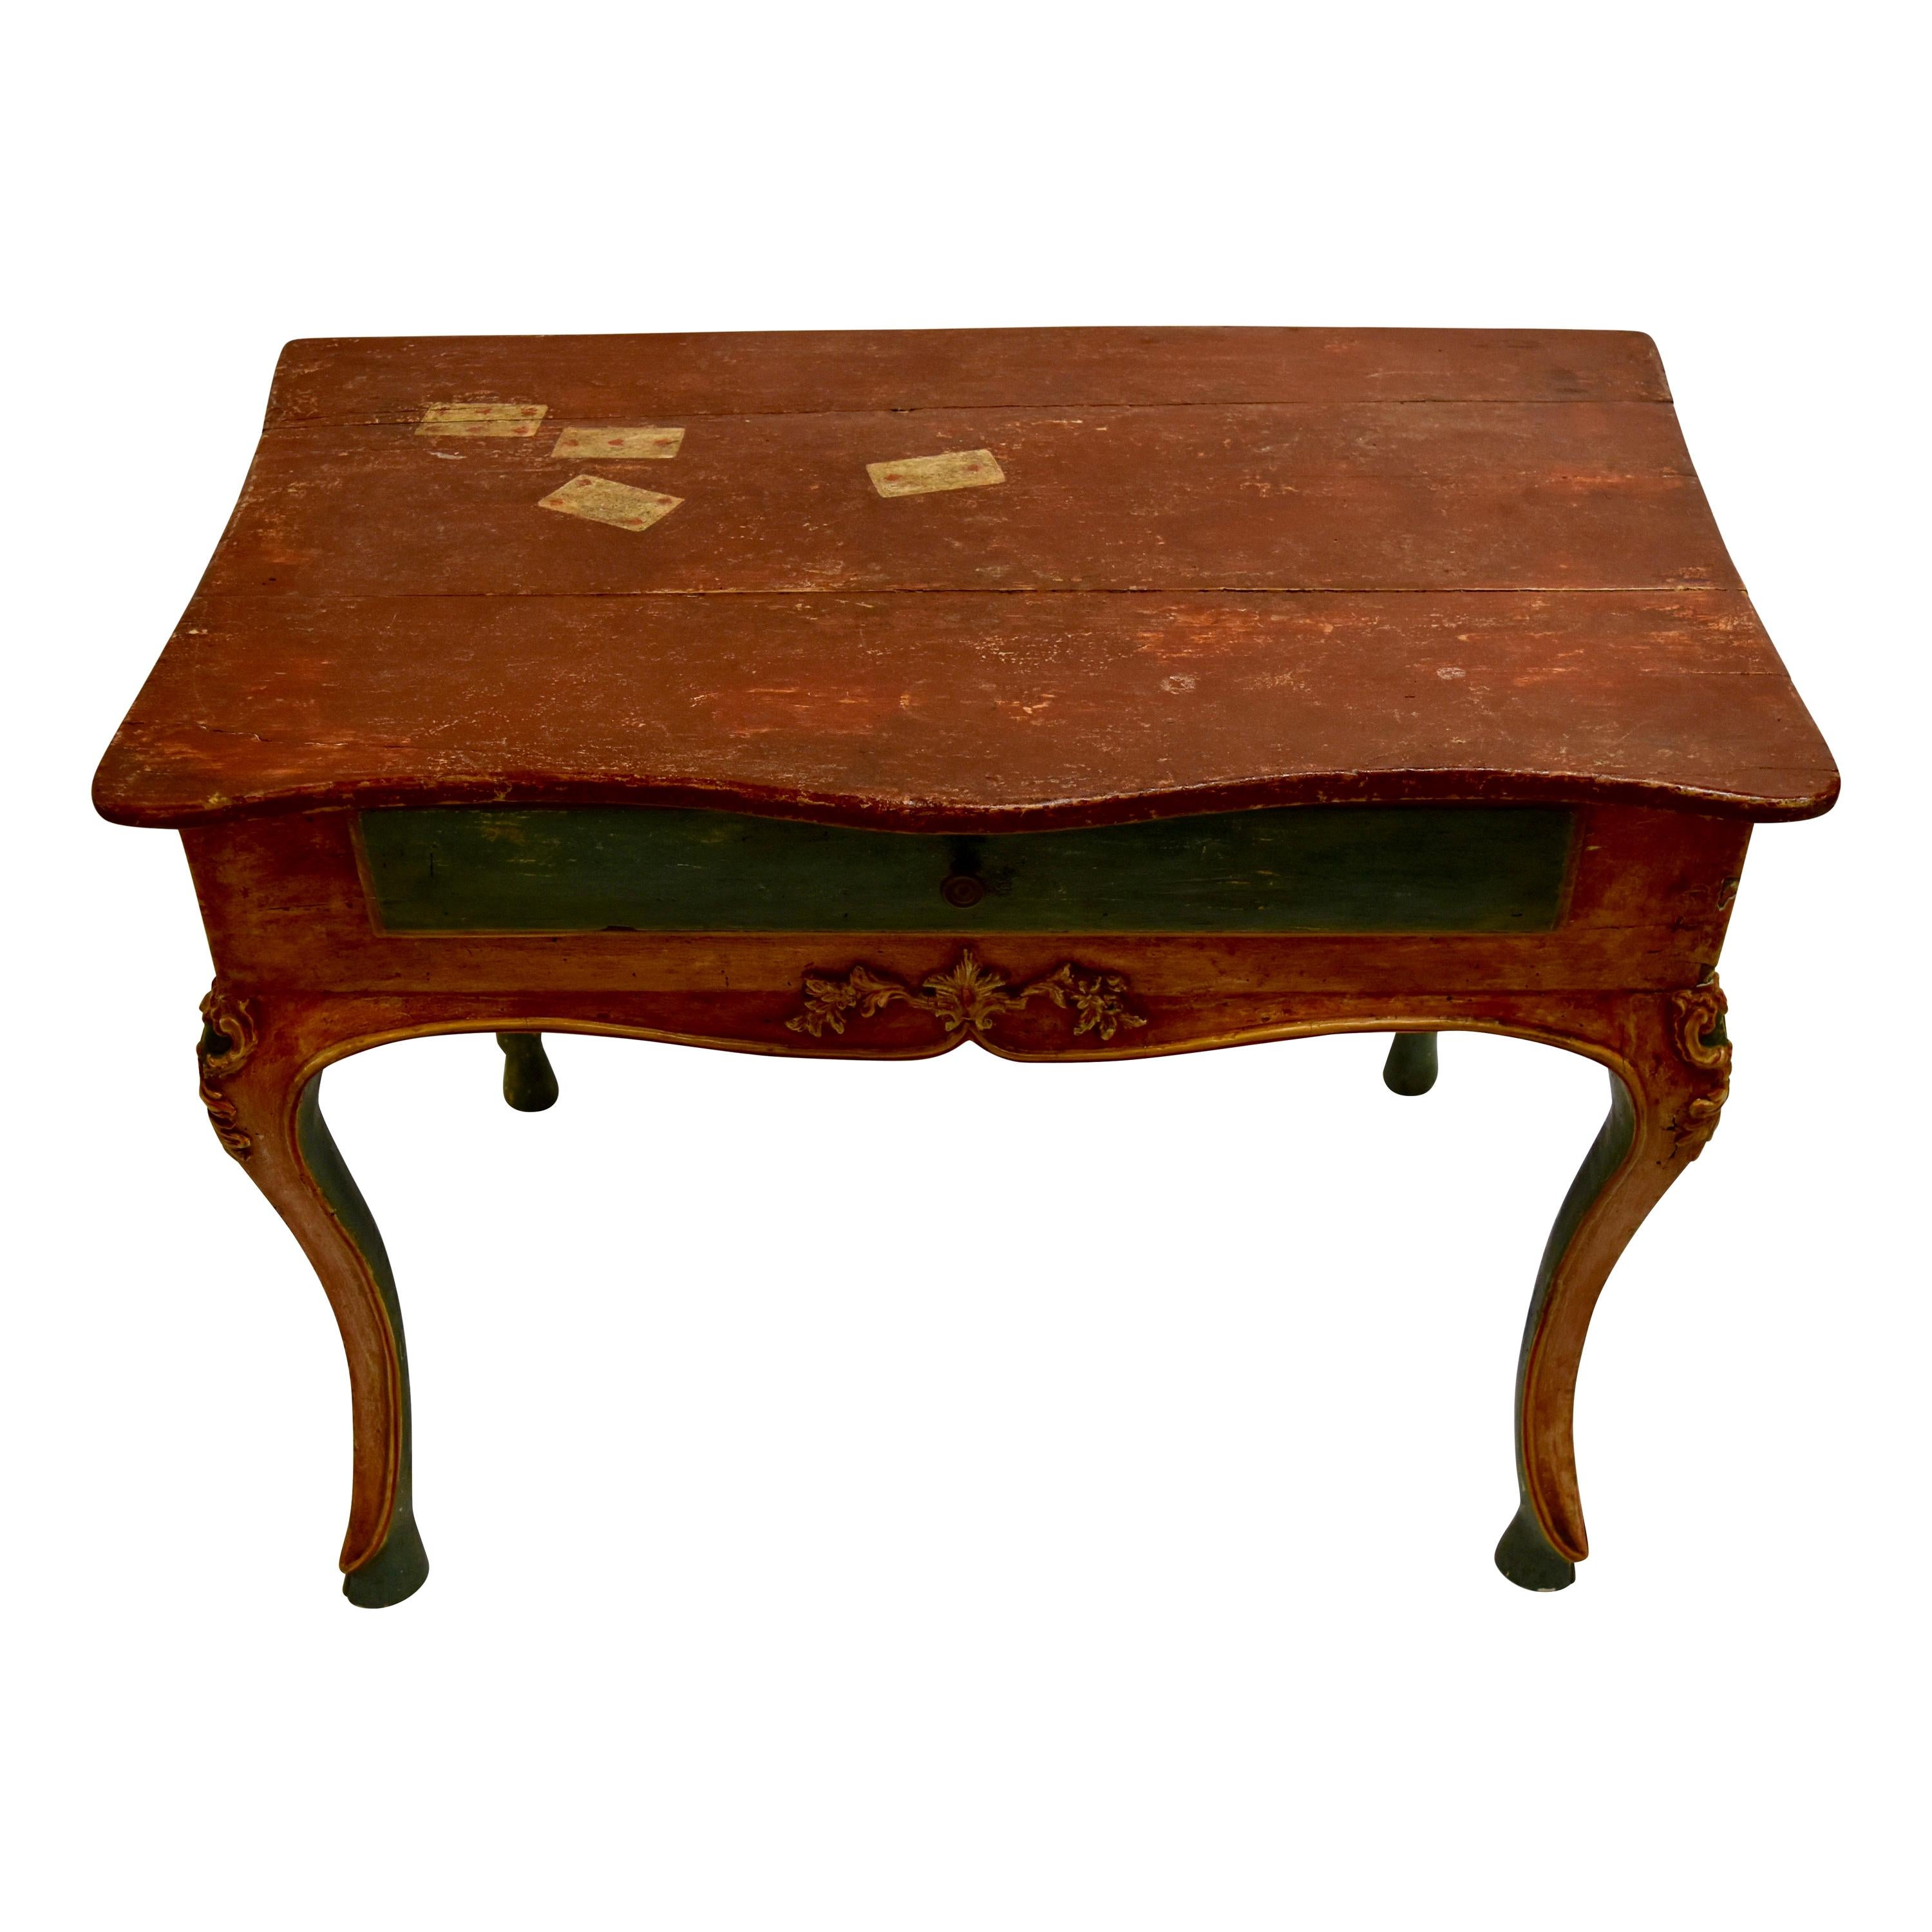 Venetian single drawer console table with trompe l'oeil detail over cabriole leg